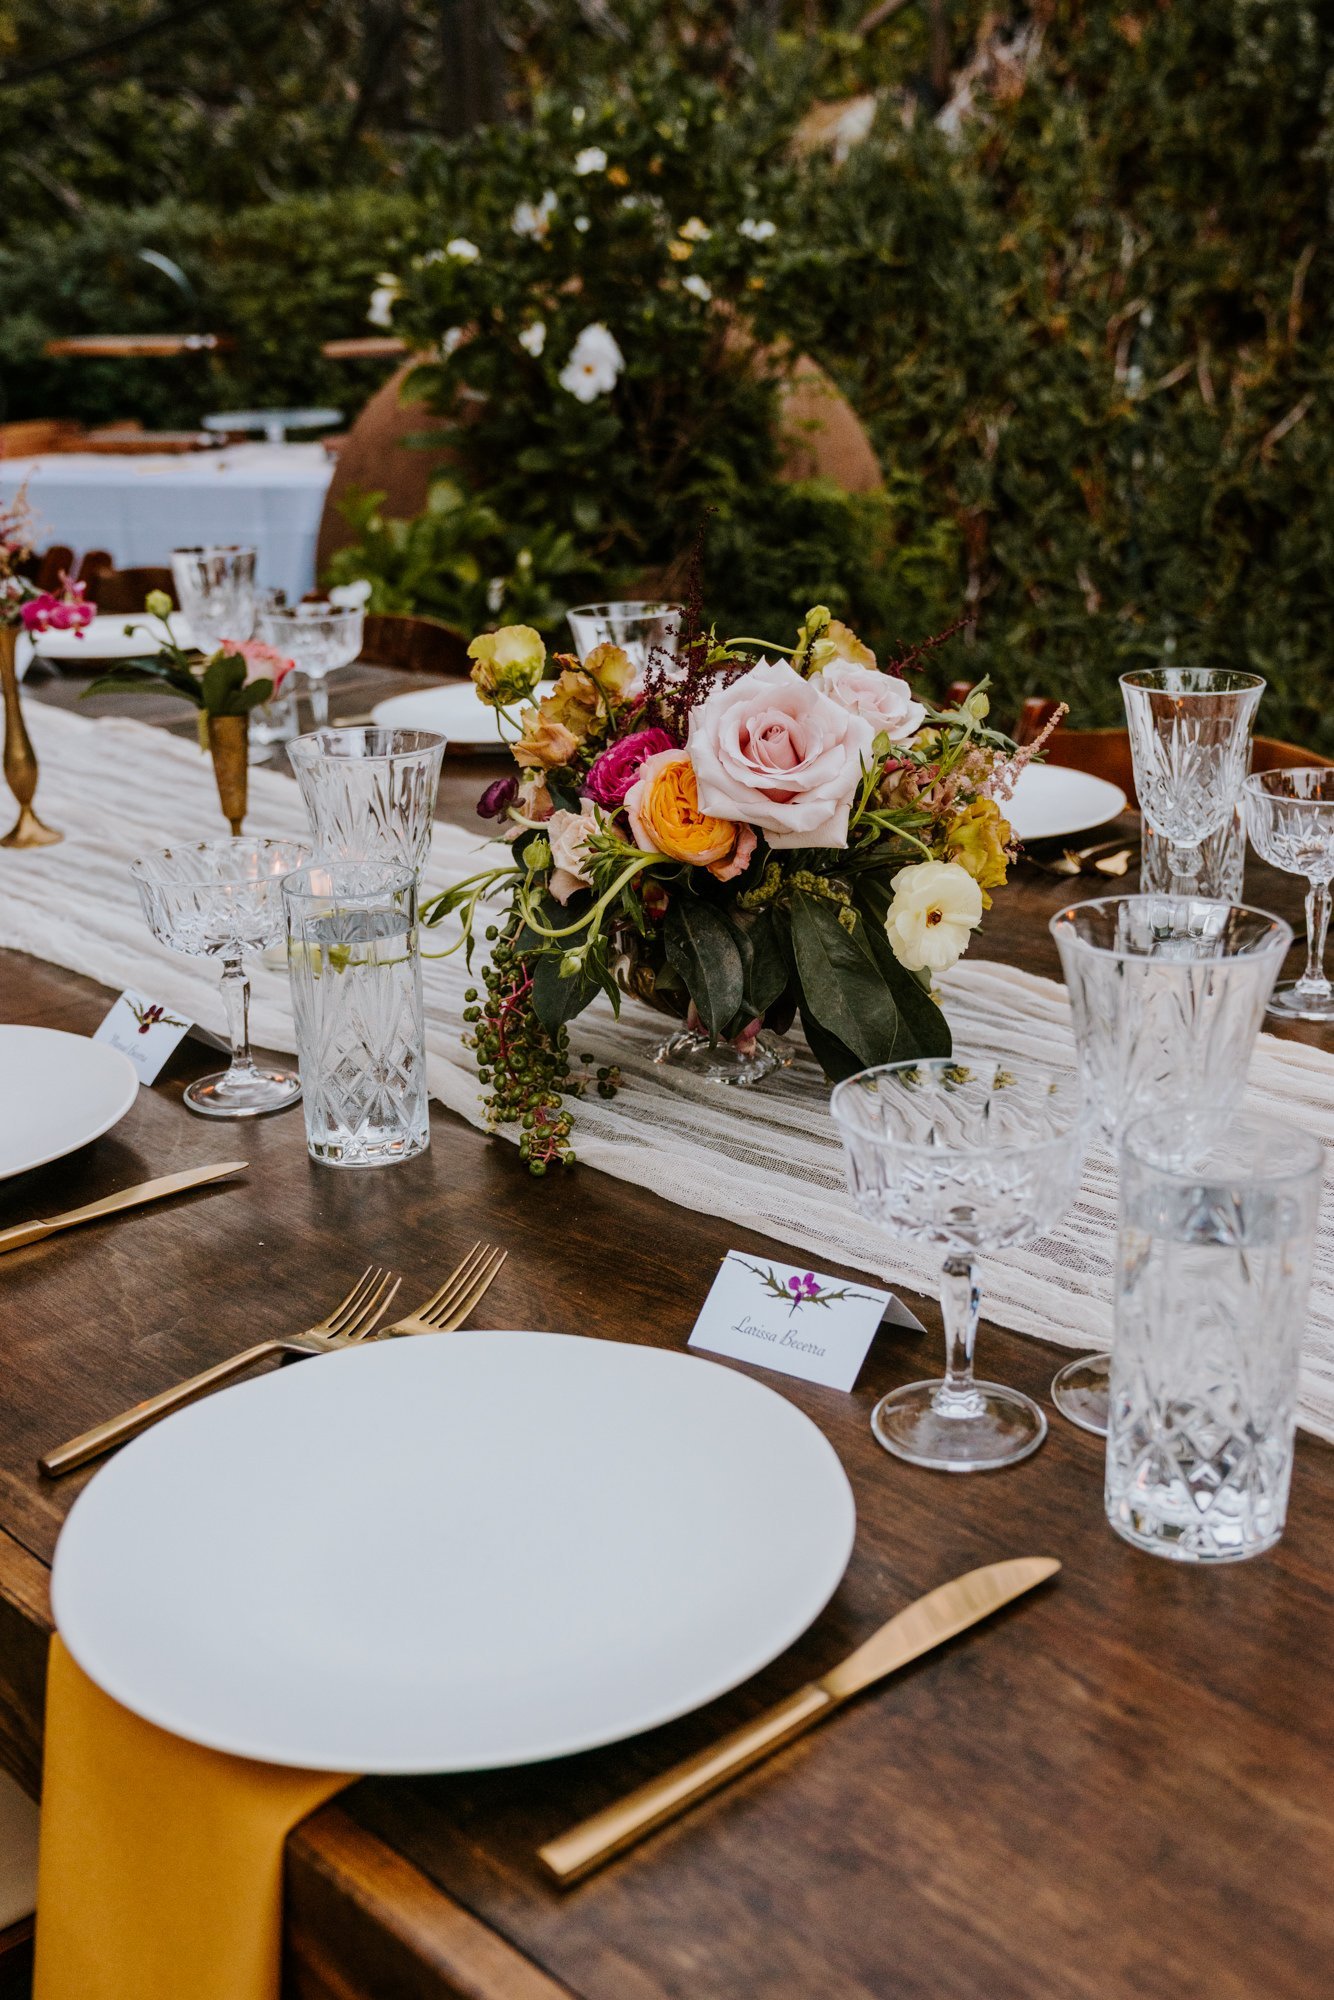 Whimsical romantic wedding reception details at The Houdini Estate wedding in Los Angeles, wedding photography by Tida Svy